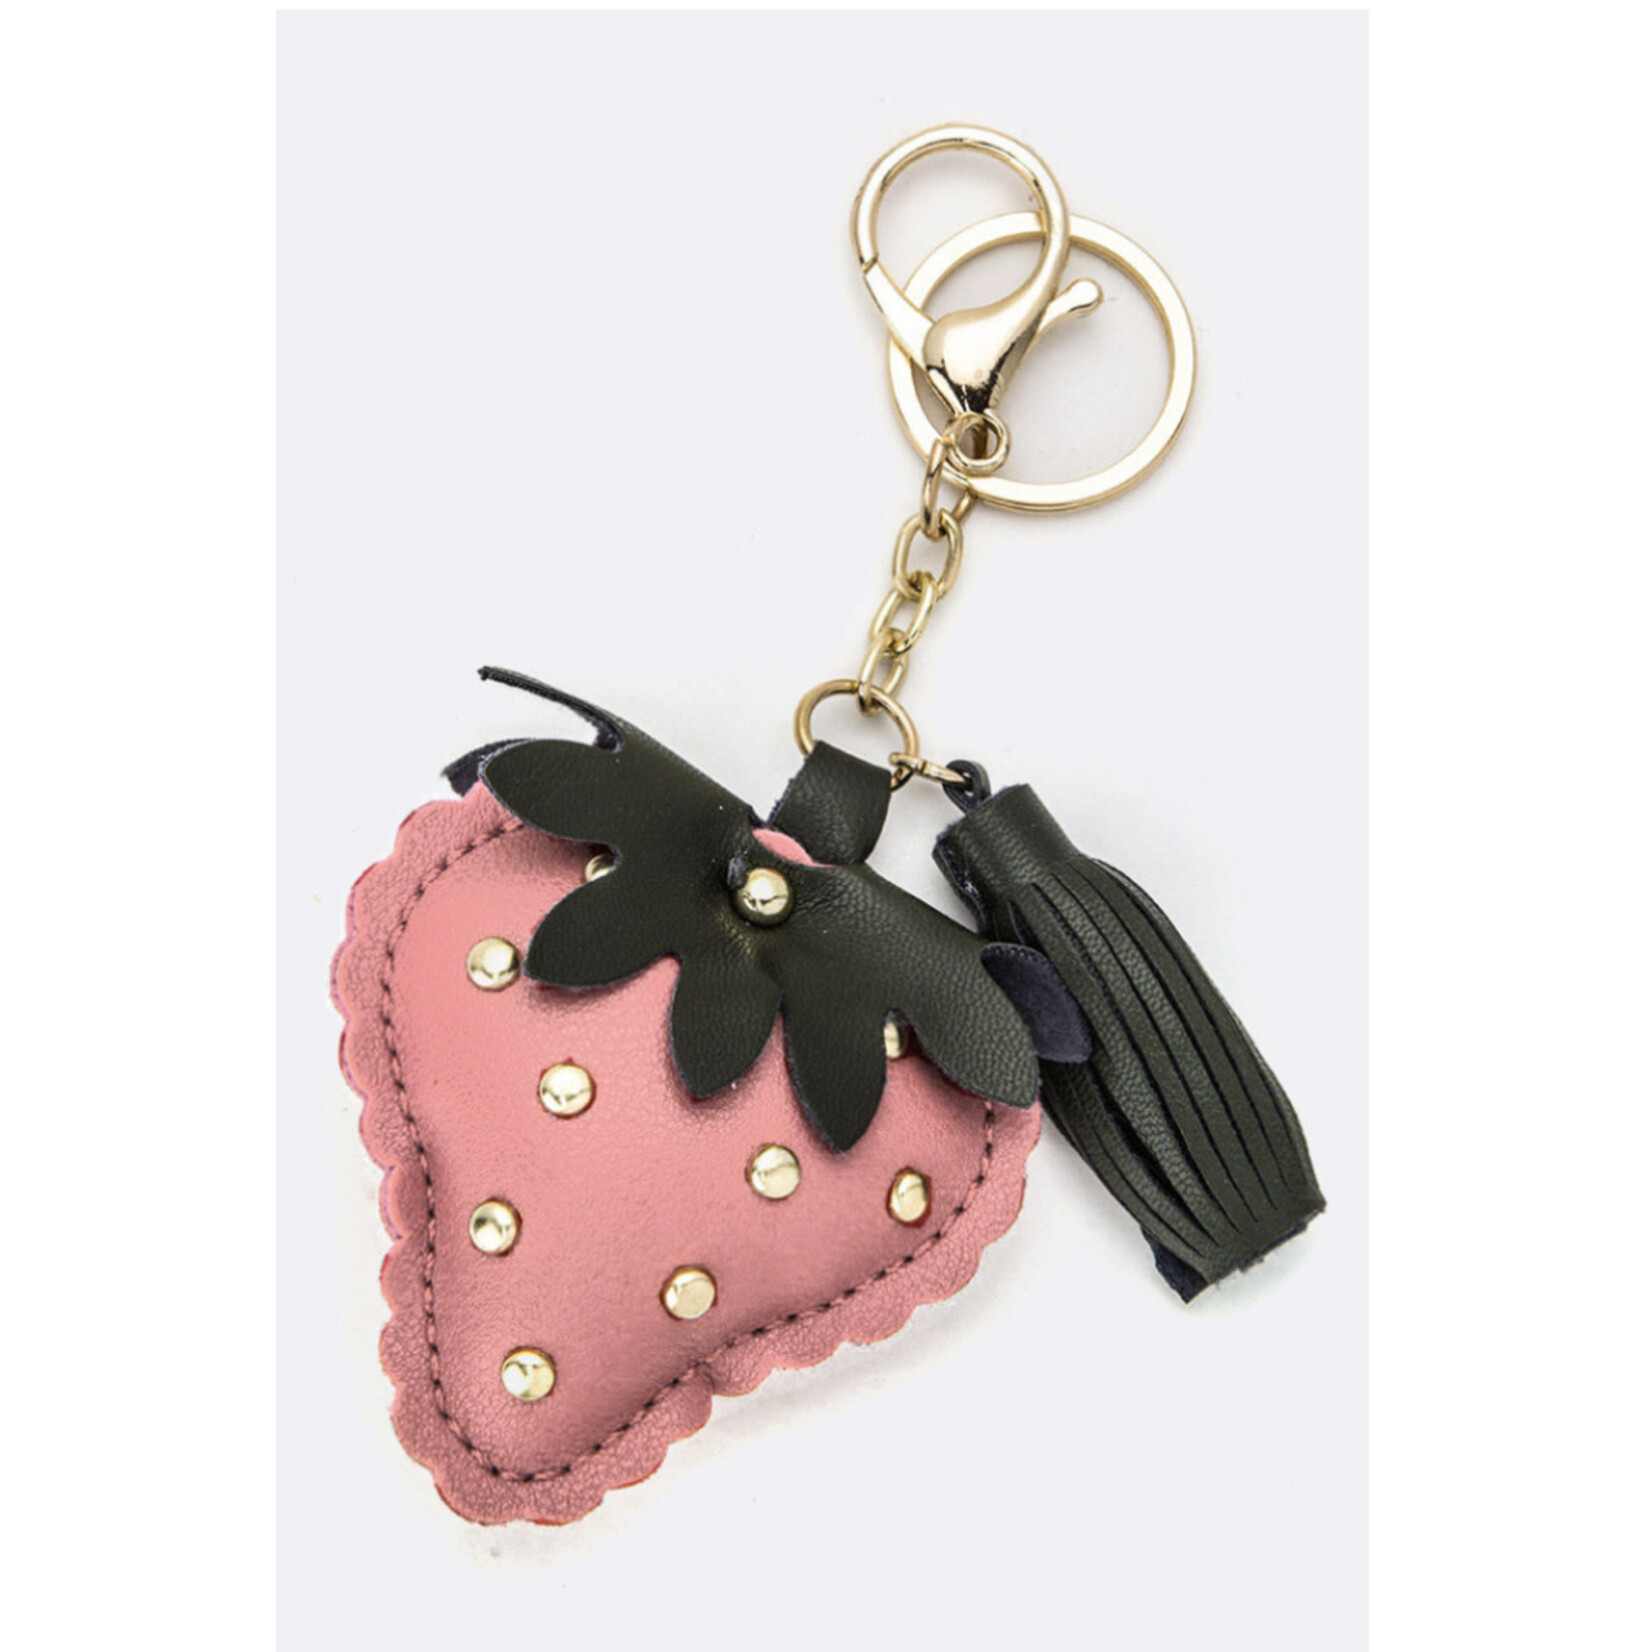 Bling & Things Bling Food Keychain